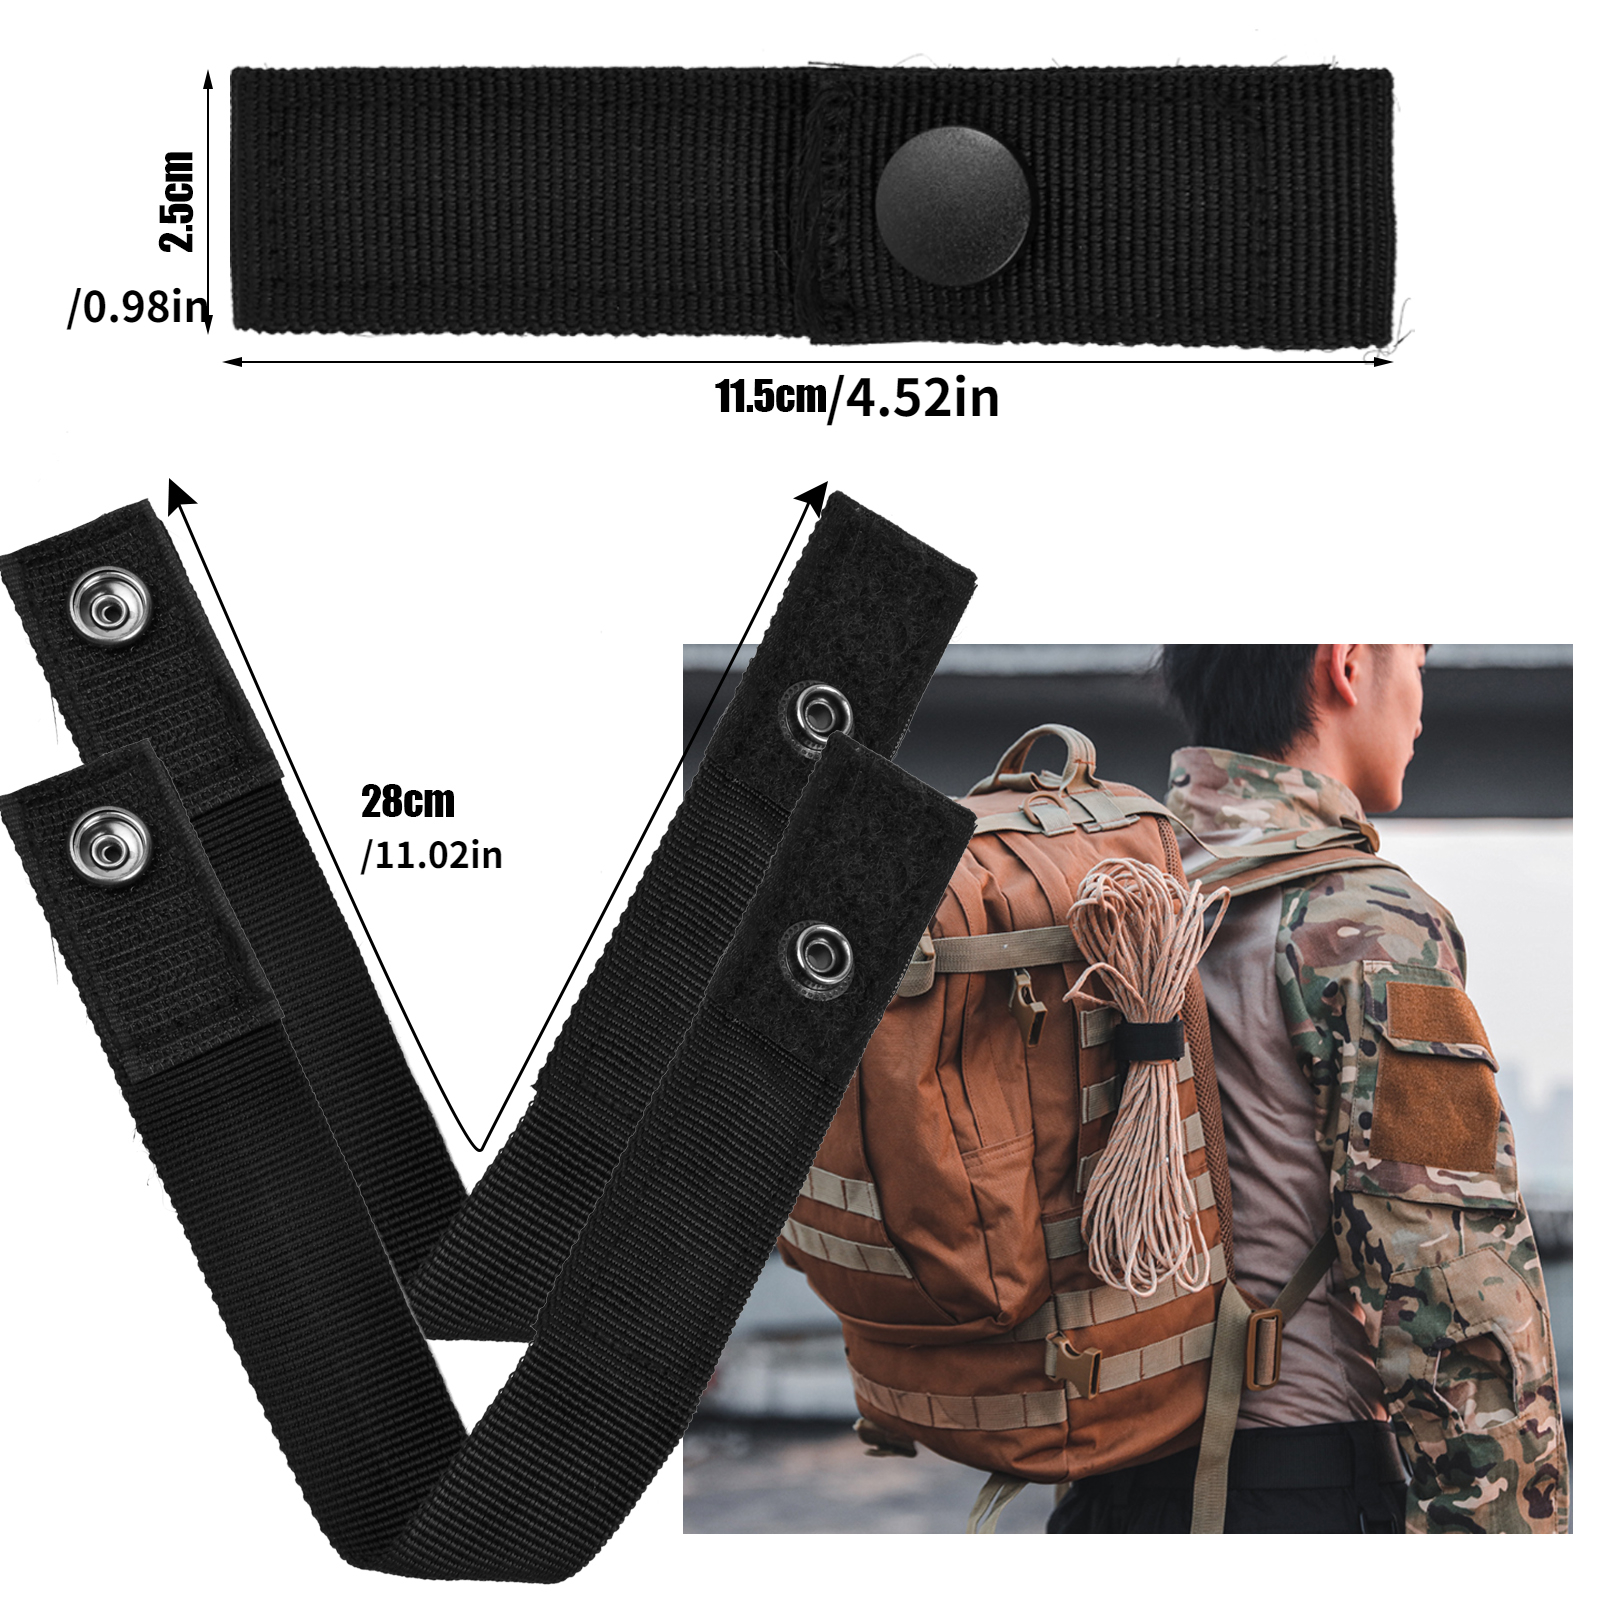 Tactical Molle D Type Nylon Attachment Straps for Bags and Backpacks black/  Set of 2 